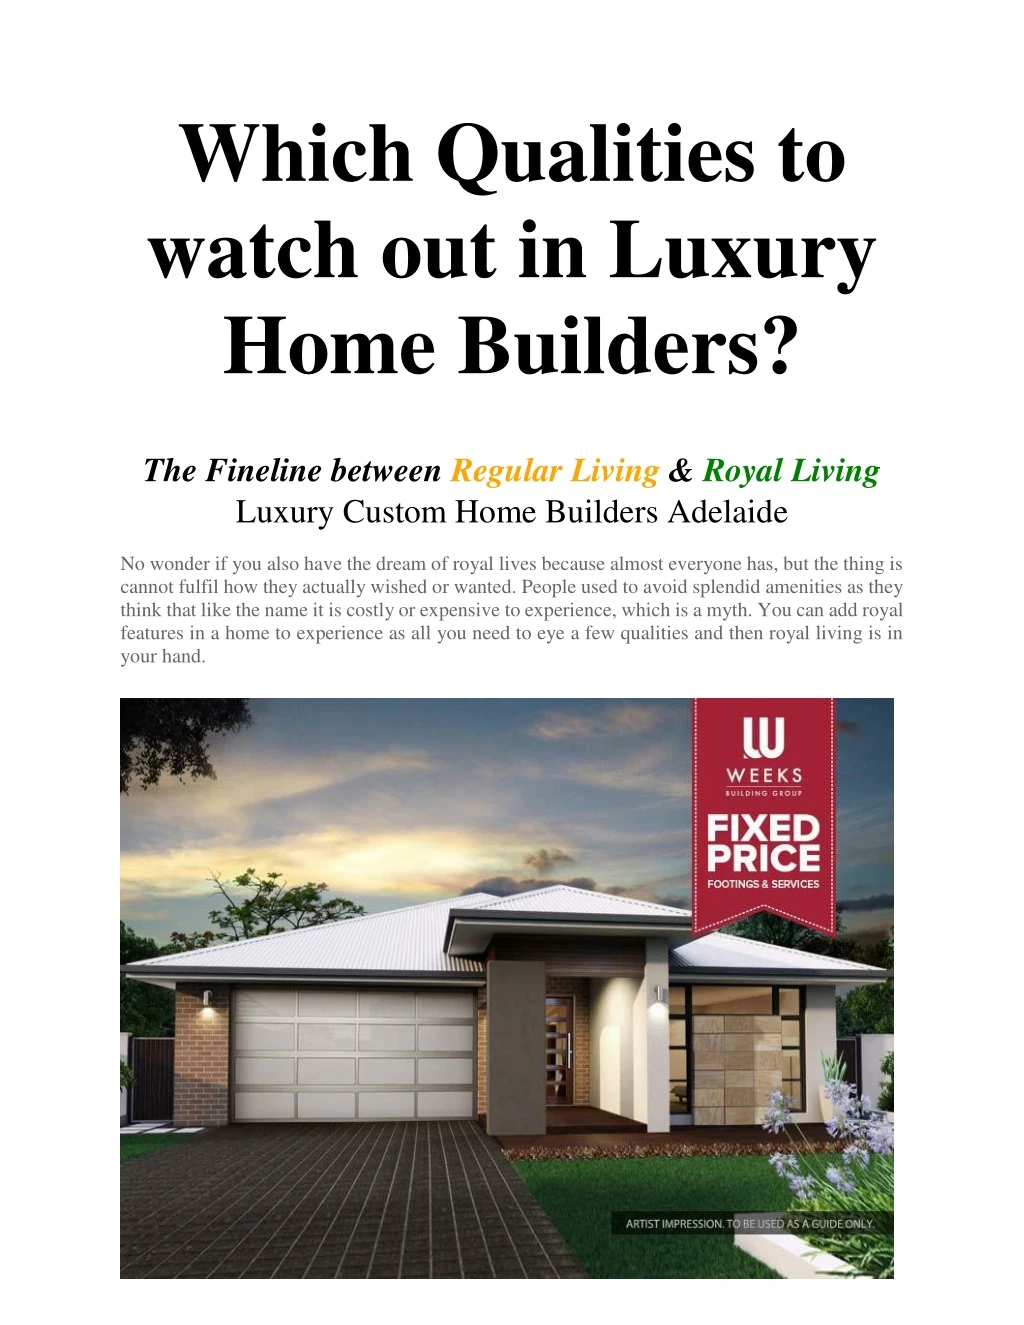 which qualities to watch out in luxury home